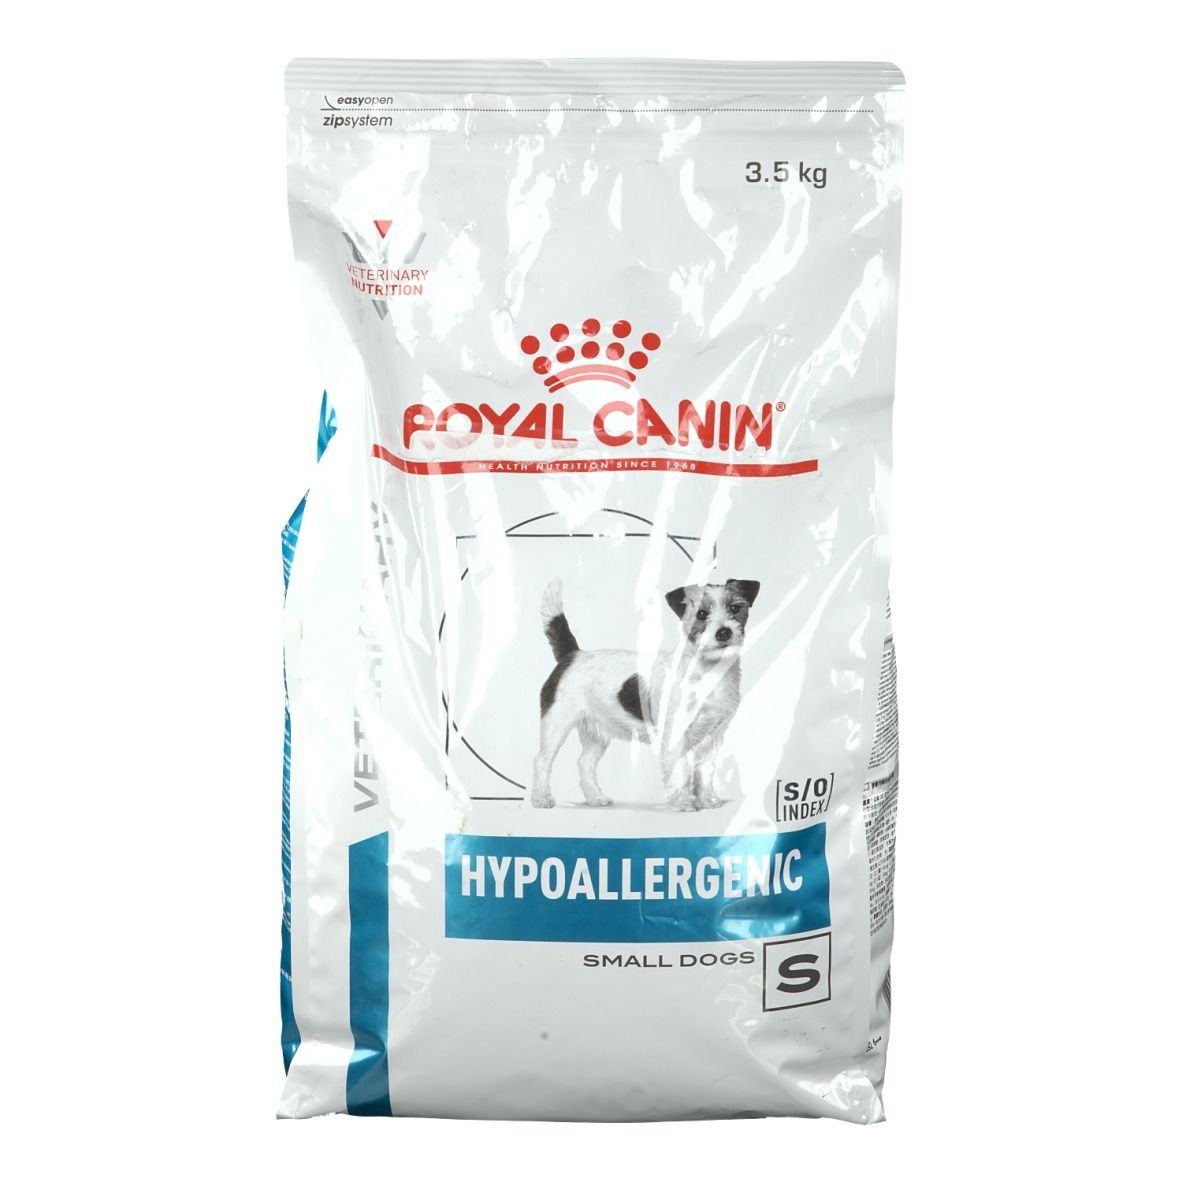 ROYAL CANIN Veterinary Hypoallergenic Small Dogs S